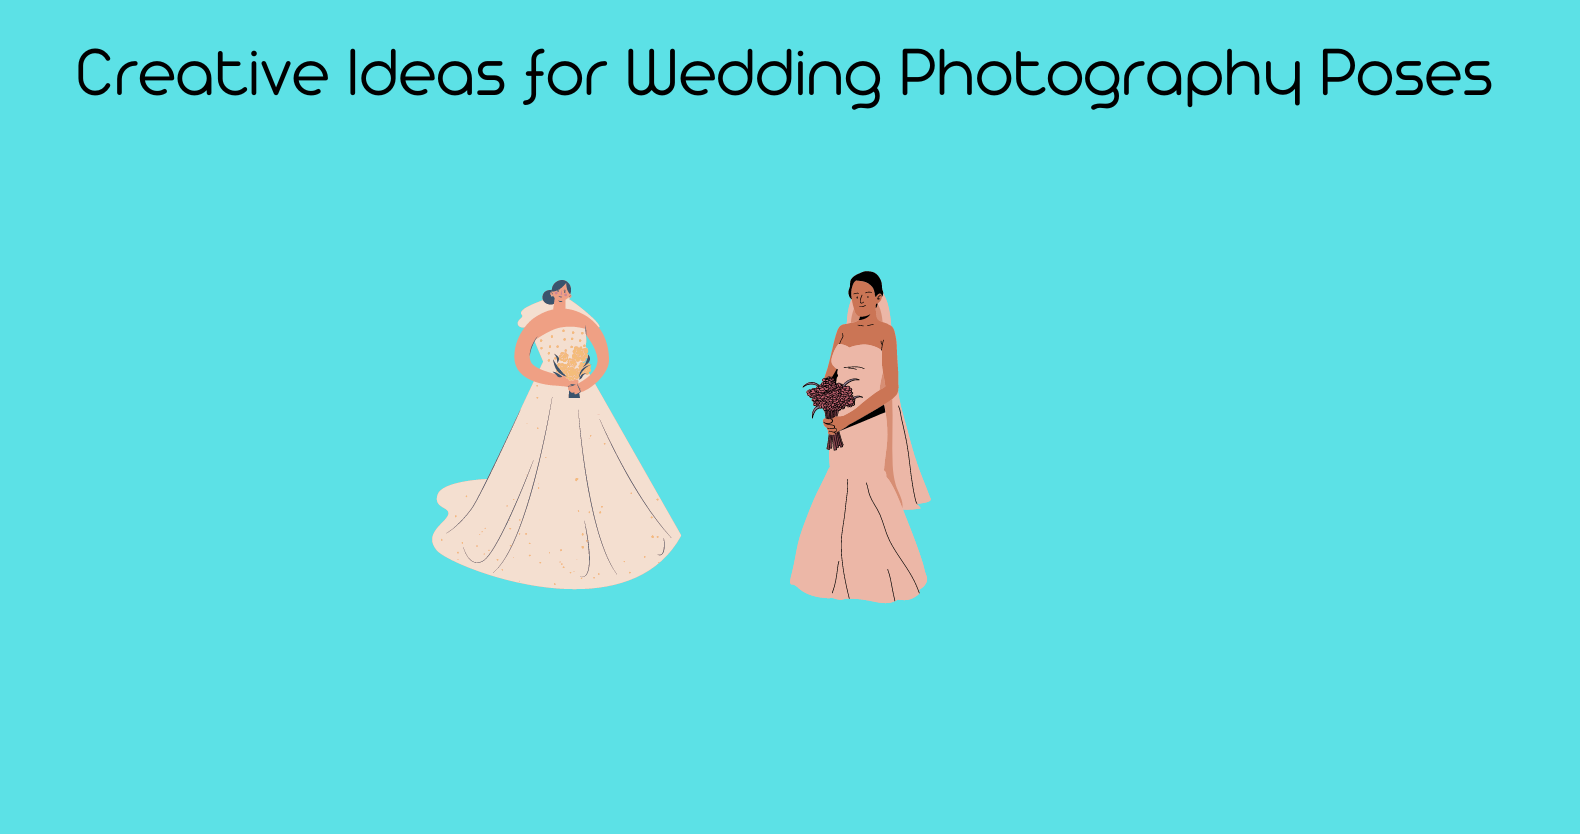 Creative Ideas for Wedding Photography Poses